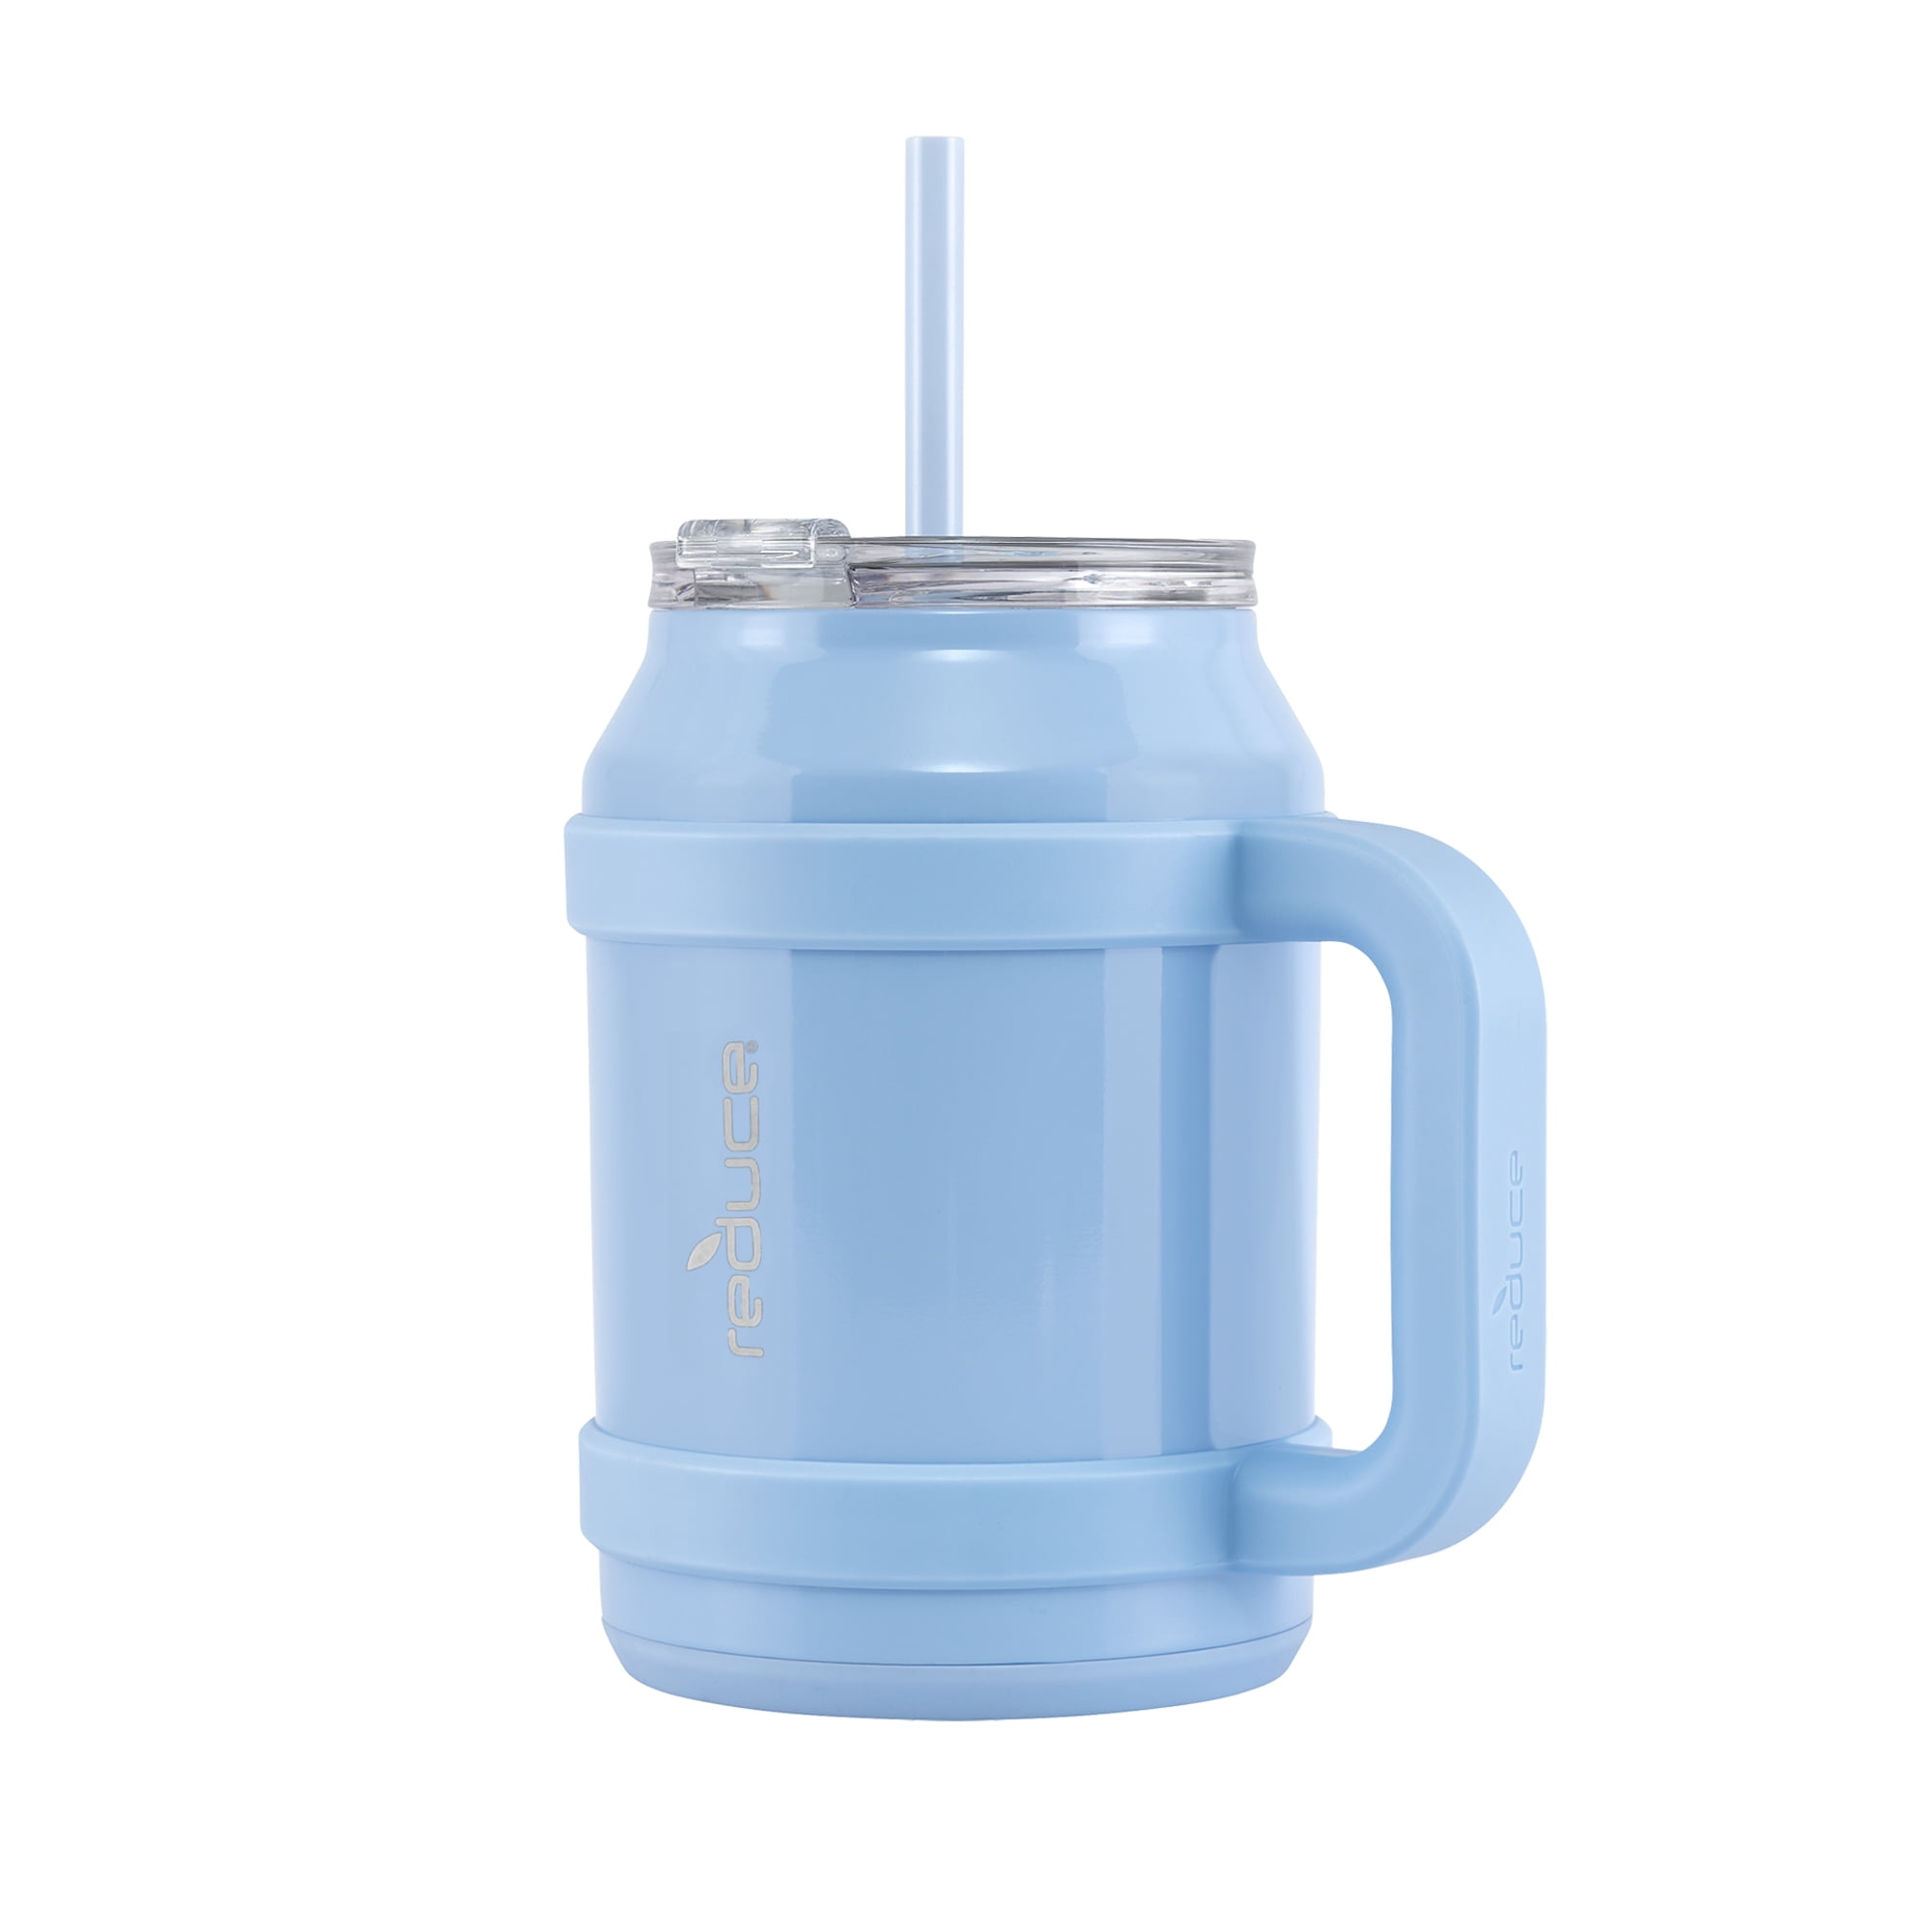 Reduce® 50 oz. Vacuum Insulated Stainless Steel Cold Mug - Assorted Styles  at Menards®